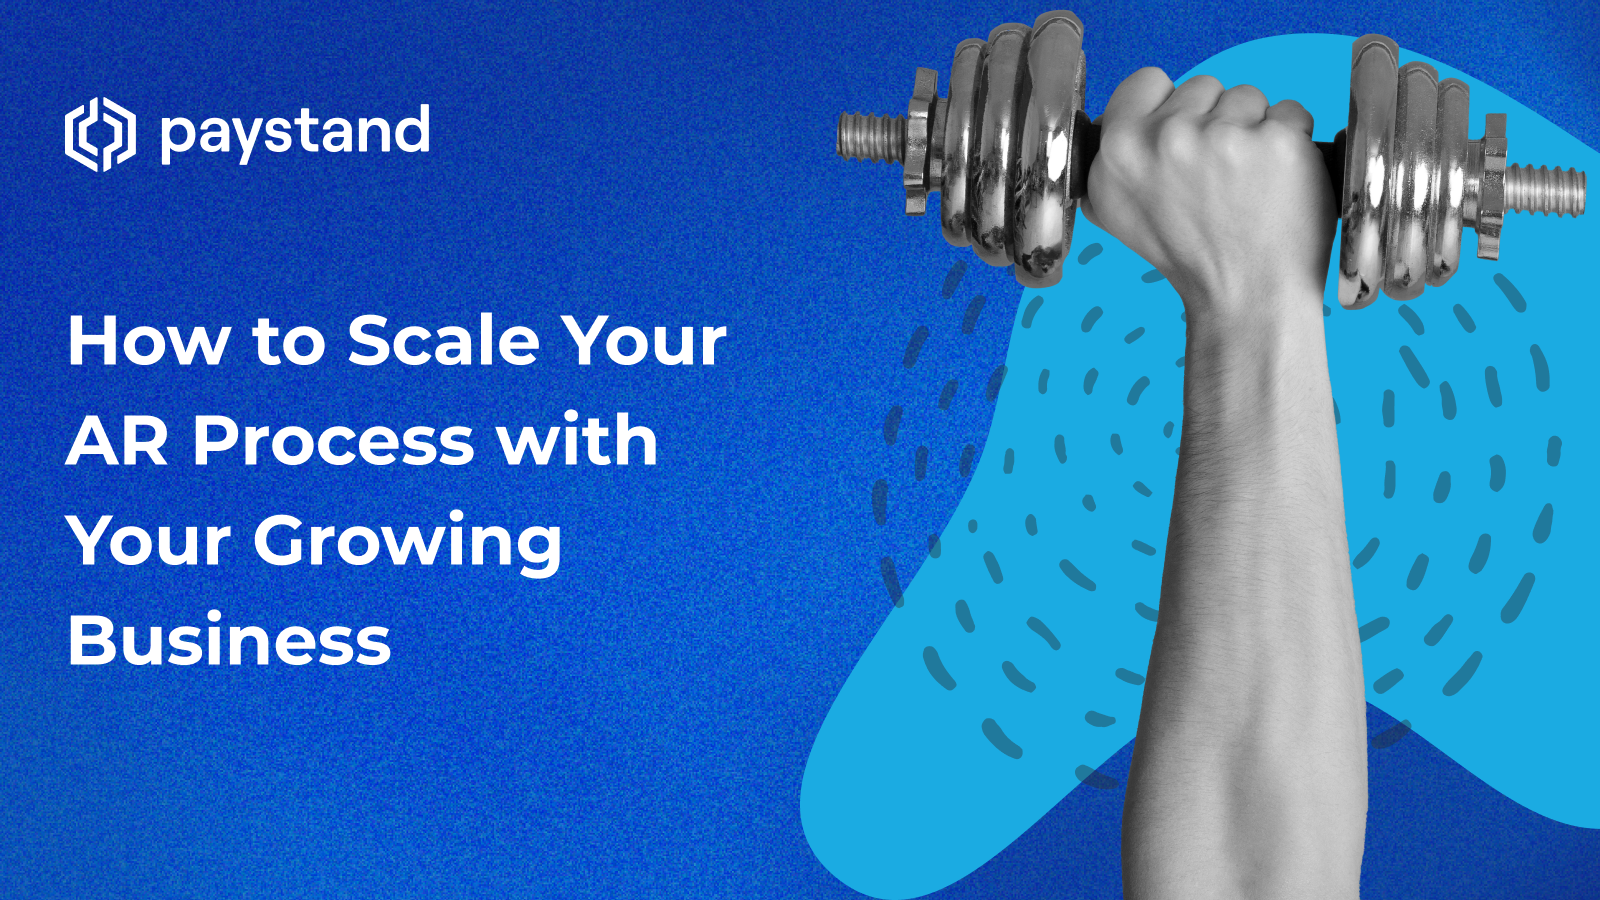 How to Scale Your AR Process with Your Growing Business